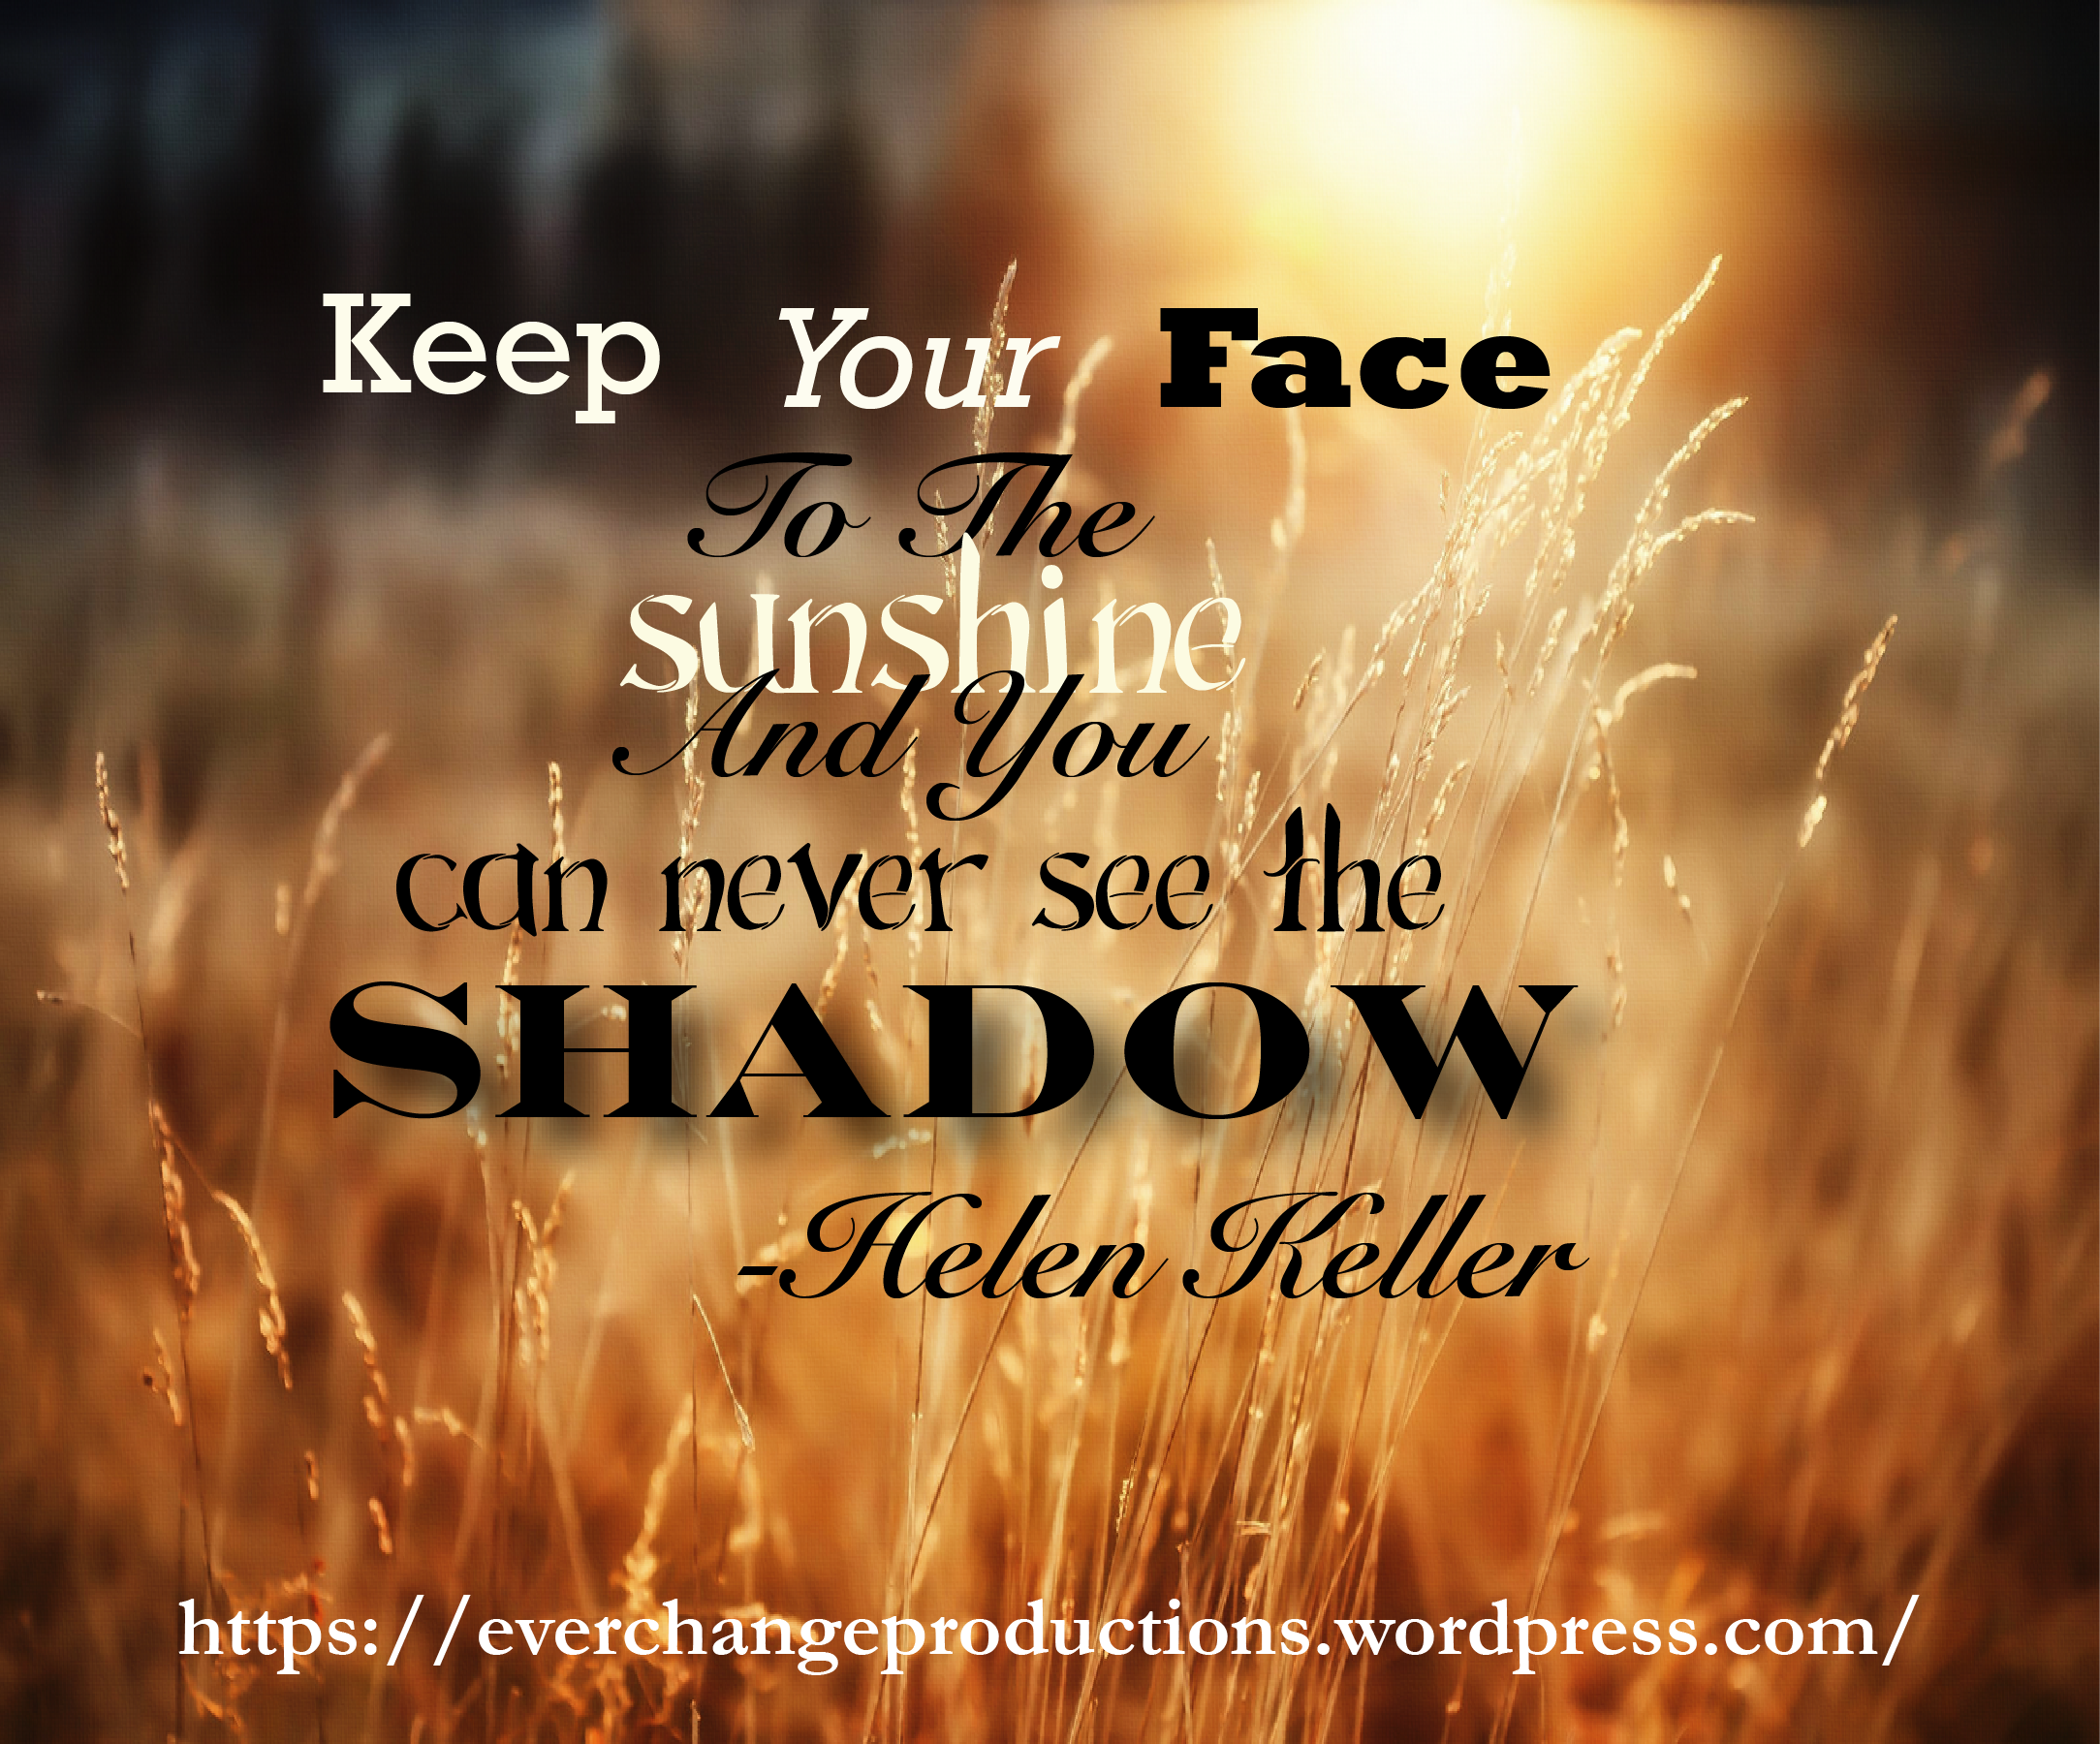 “Keep your face to the sunshine and you can never see the shadow.” ~Helen Keller motivational quote